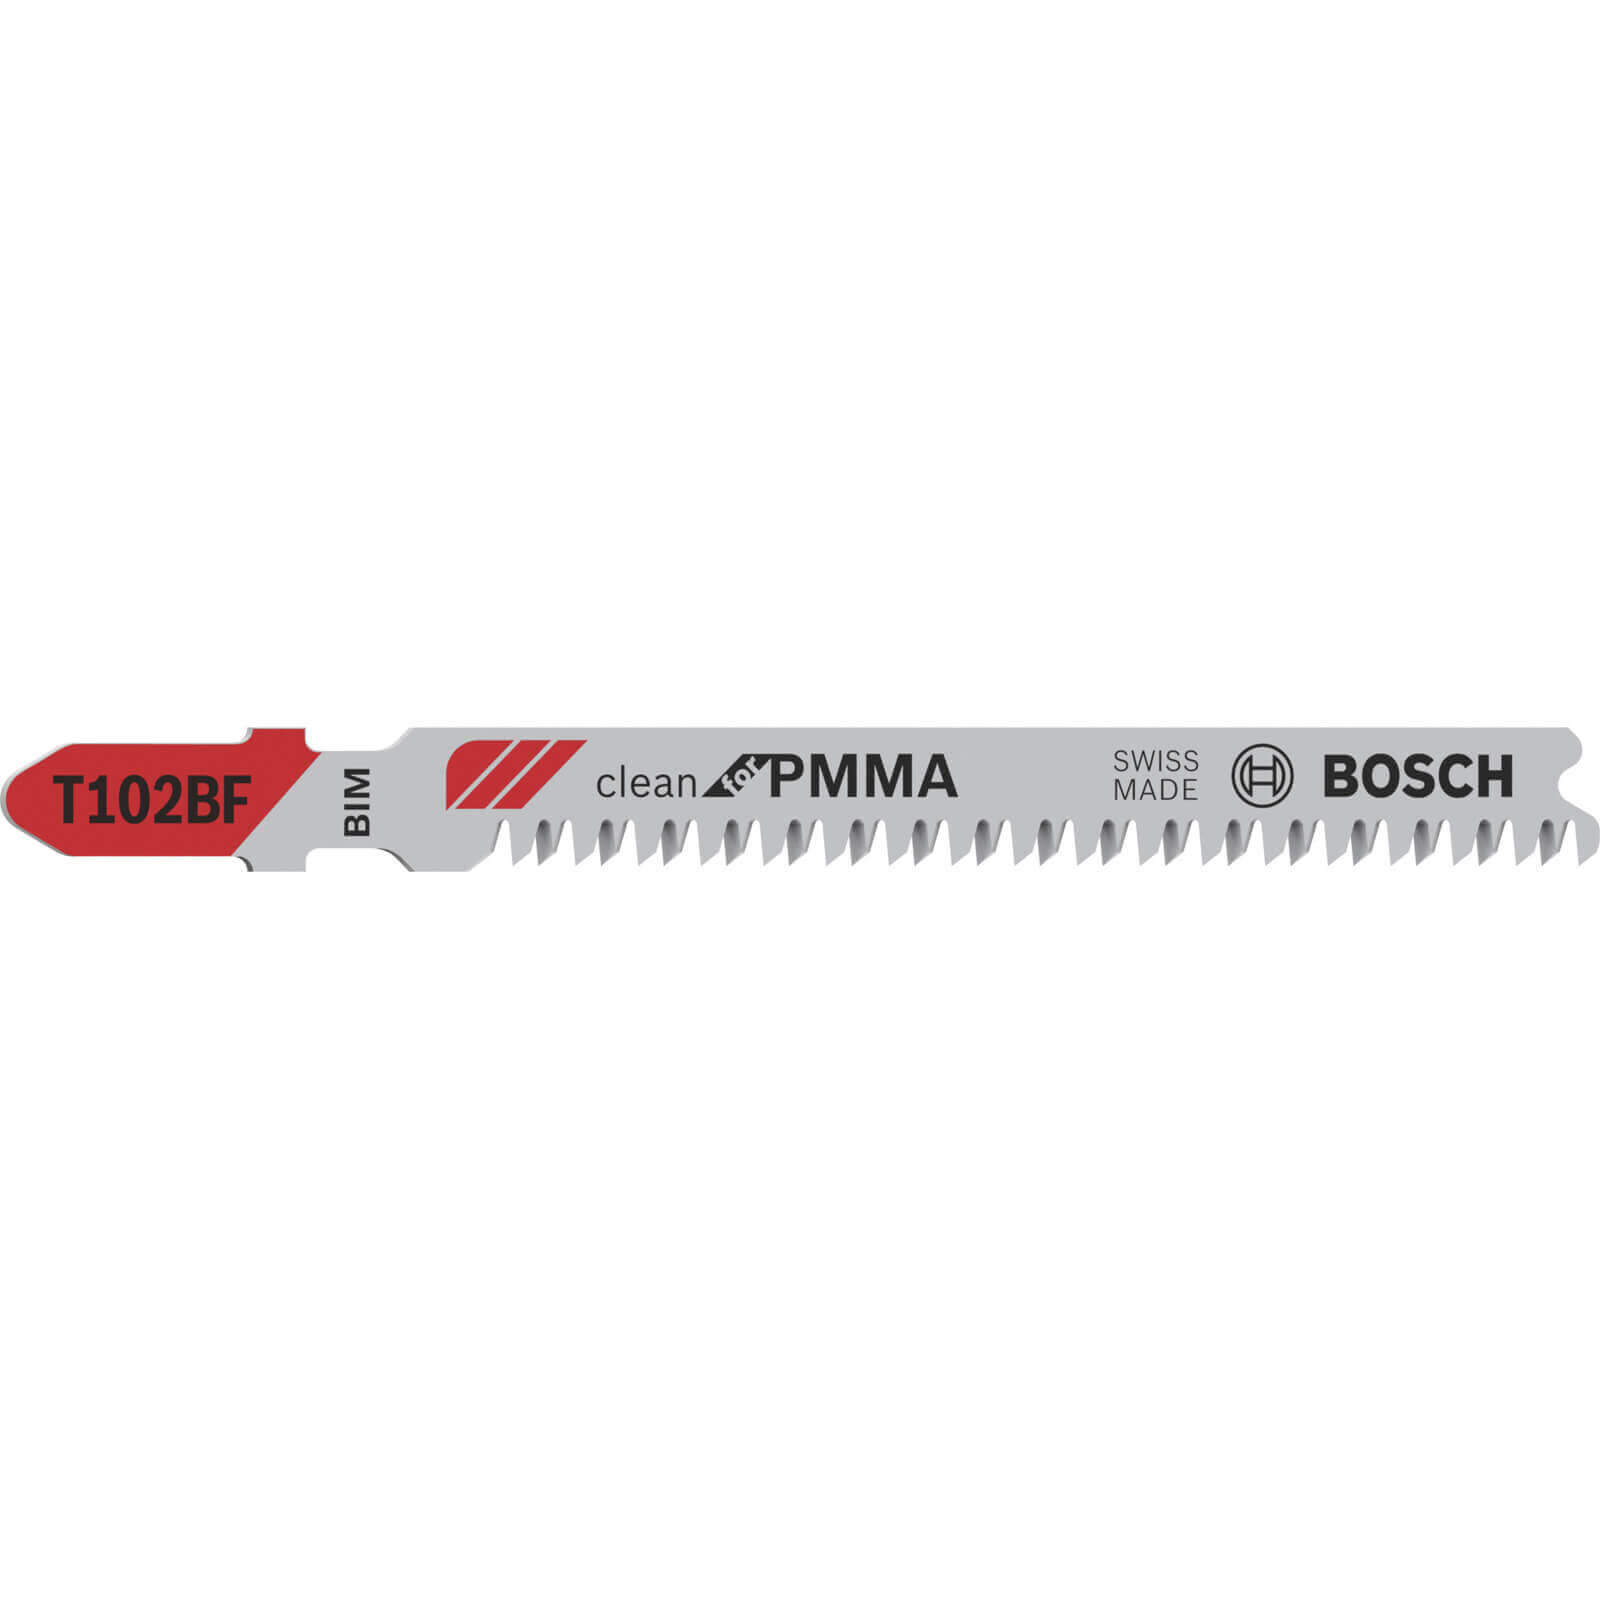 Photos - Power Tool Accessory Bosch T102BF Plastic Perspex Cutting Jigsaw Blade Pack of 5 2608636781 